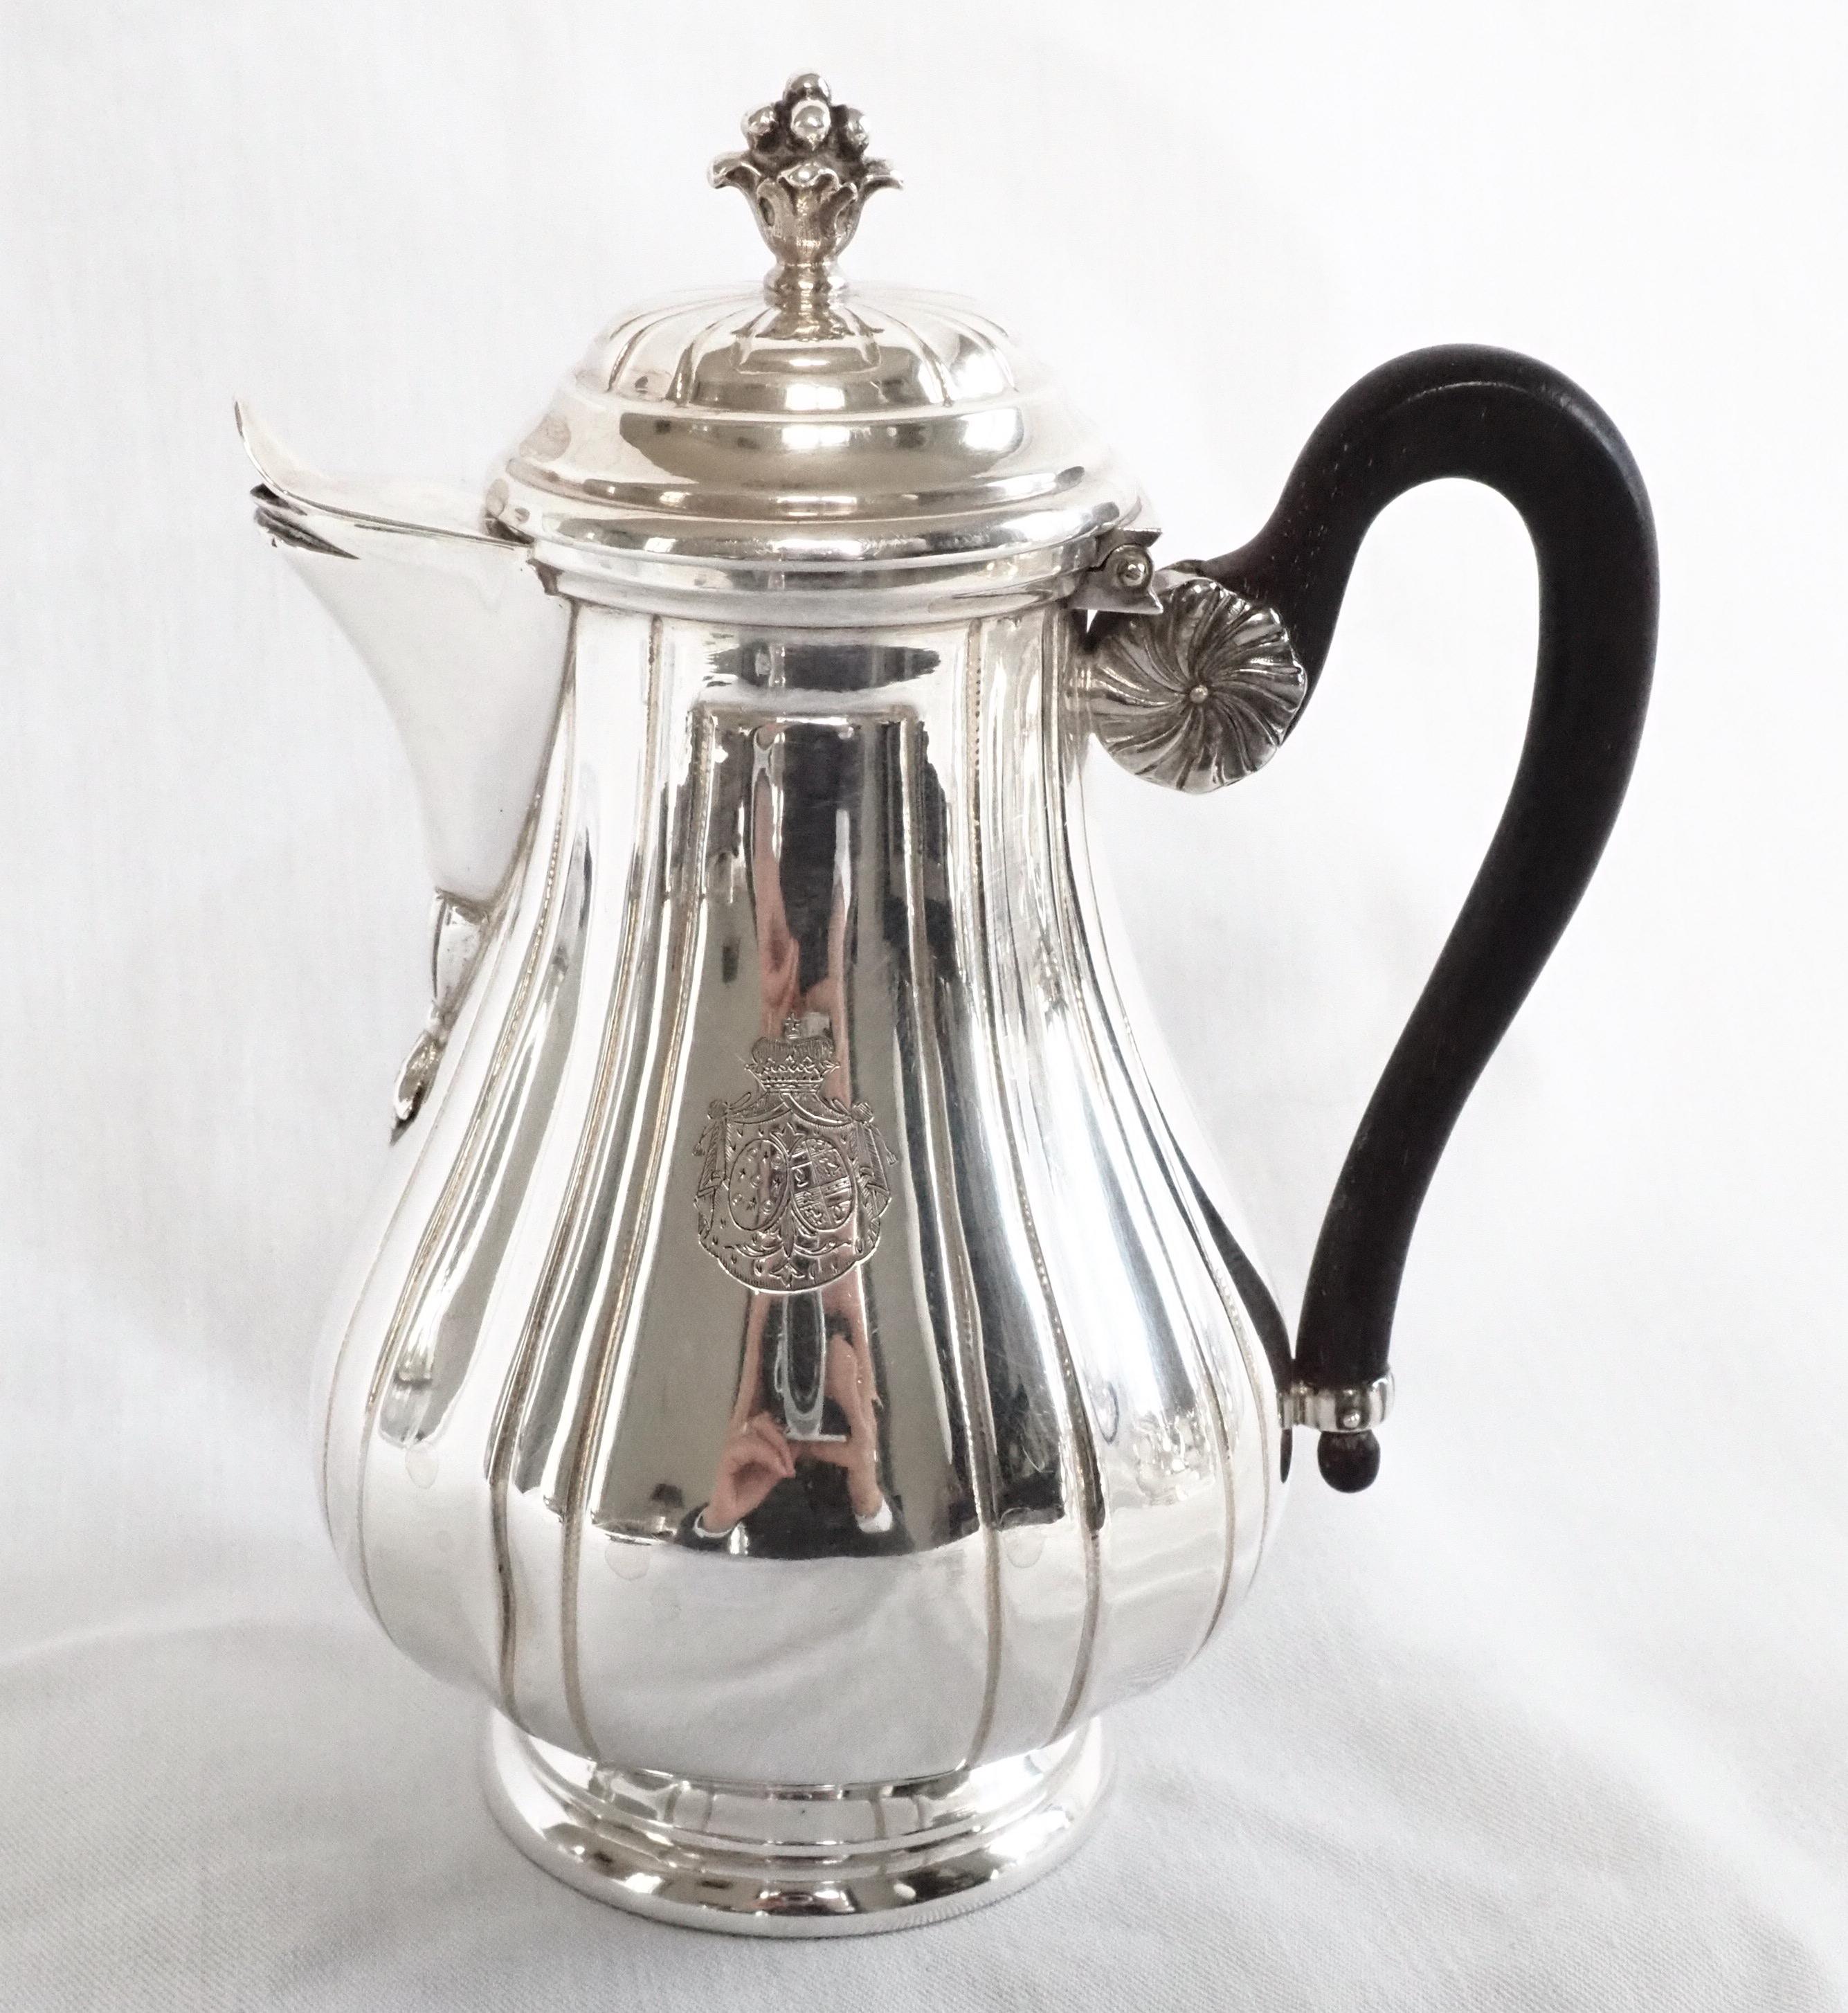 Regency style sterling silver two-person coffee and tea set, beautiful 18th century style pattern decorated with a French coat of arms, a crown of Duke on top (highest French aristocracy grade after Prince).
Our set is composed of 4 pieces - a